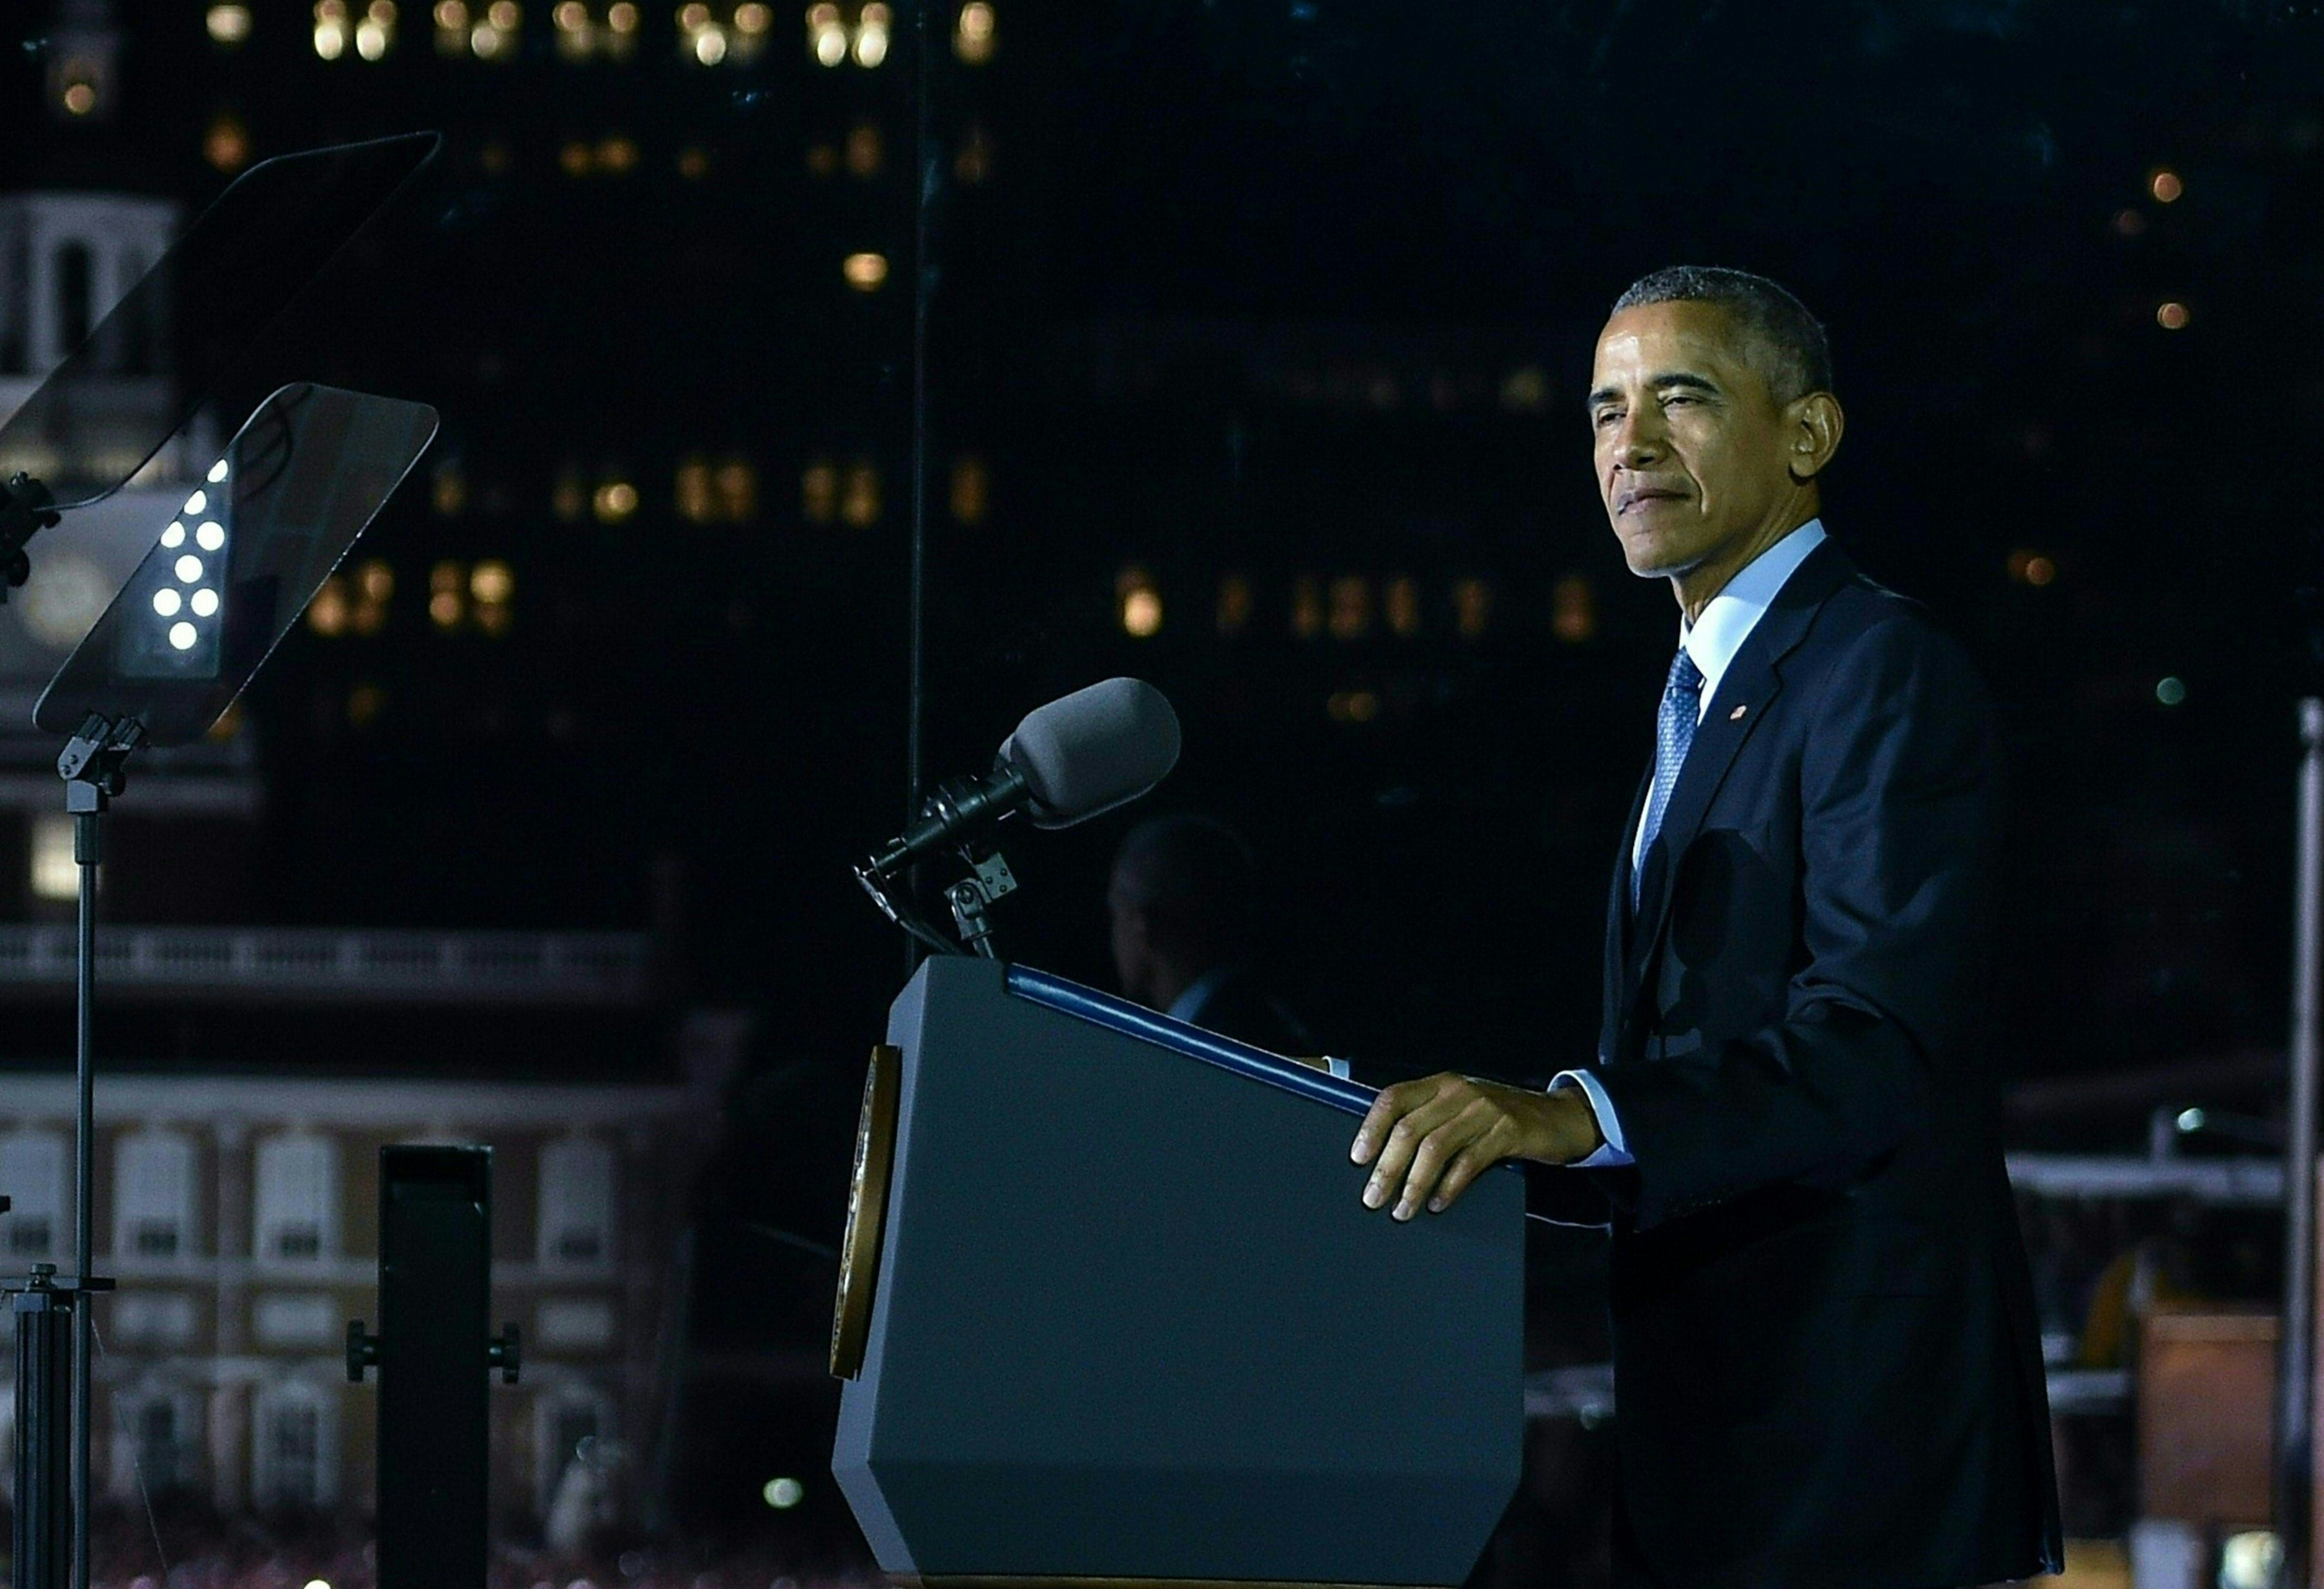 US President Barack Obama adresses the crowd during a rally for Democratic presidential nominee Hillary Clinton, on Independence Mall, November 7, 2016 in Philadelphia, Pennsylvania. About 40,000 people flooded Independence Mall in Philadelphia for Hillary Clinton's rally with her husband Bill, President Barack Obama and his wife Michelle at her side, a campaign aide said. The attendance set a new record for Clinton, with the previous high point a rally in Ohio that drew 18,500 people, a campaign aide told reporters traveling with the candidate.  / AFP PHOTO / NICHOLAS KAMM